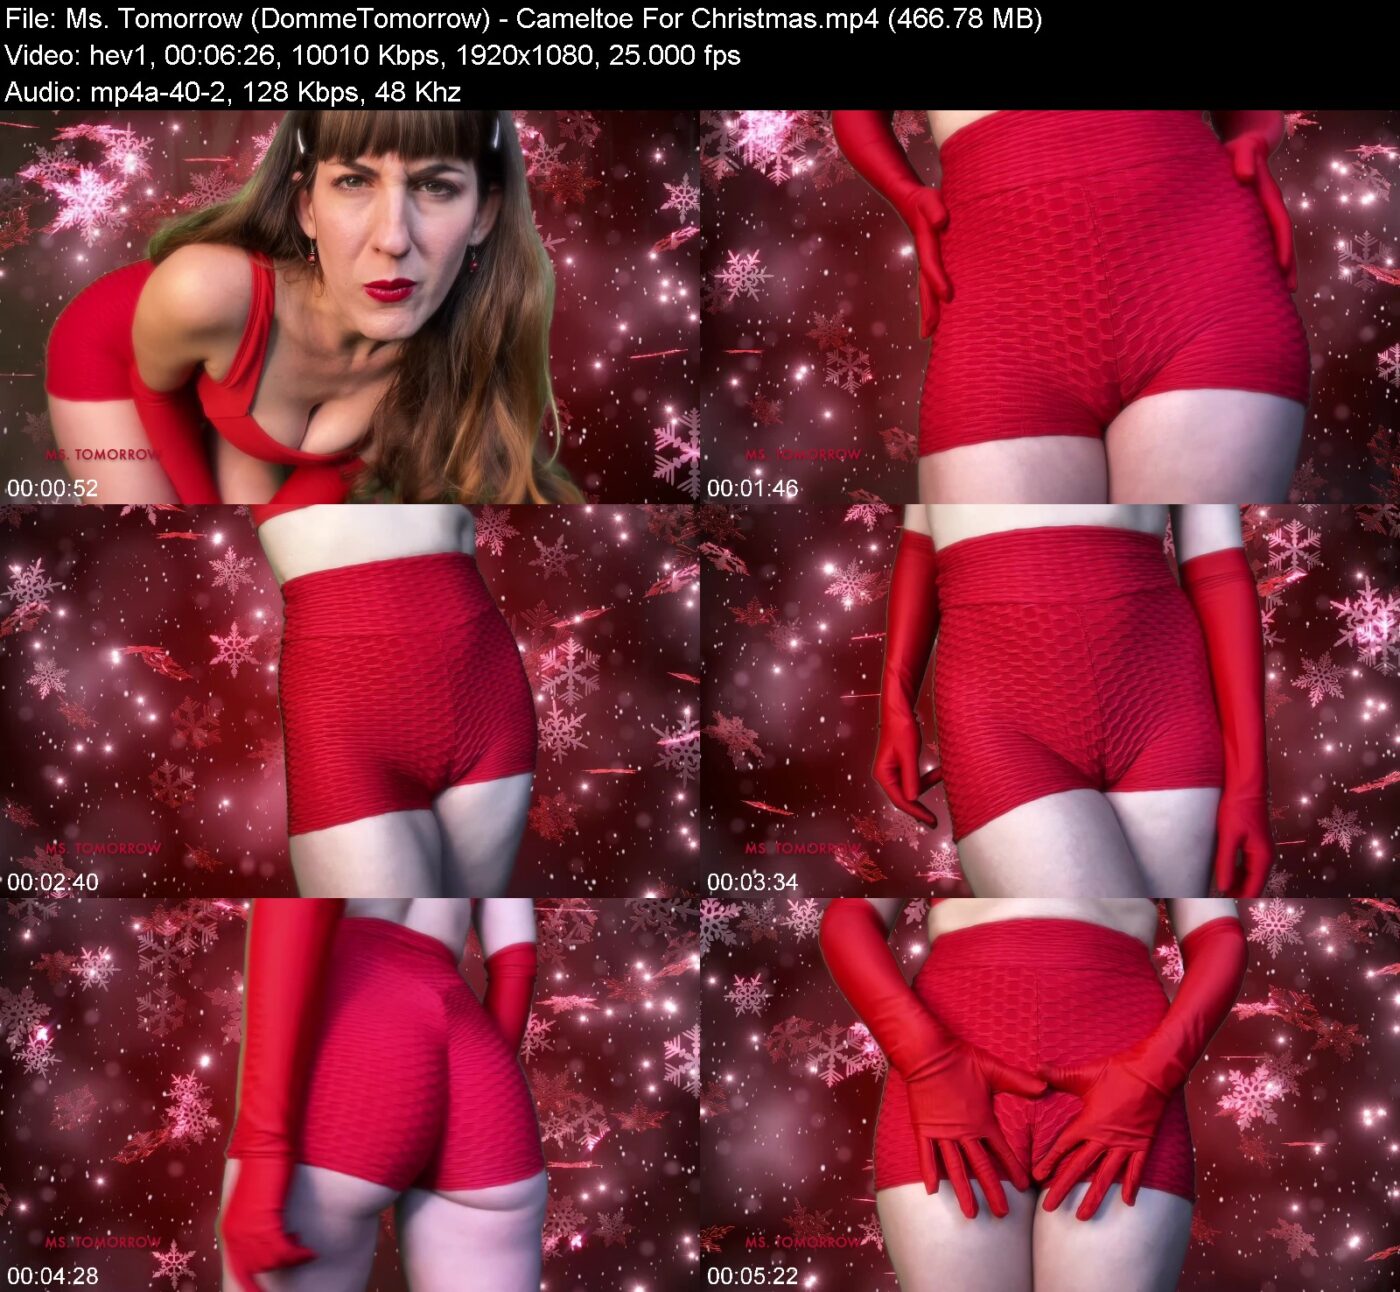 Ms. Tomorrow (DommeTomorrow) in Cameltoe For Christmas